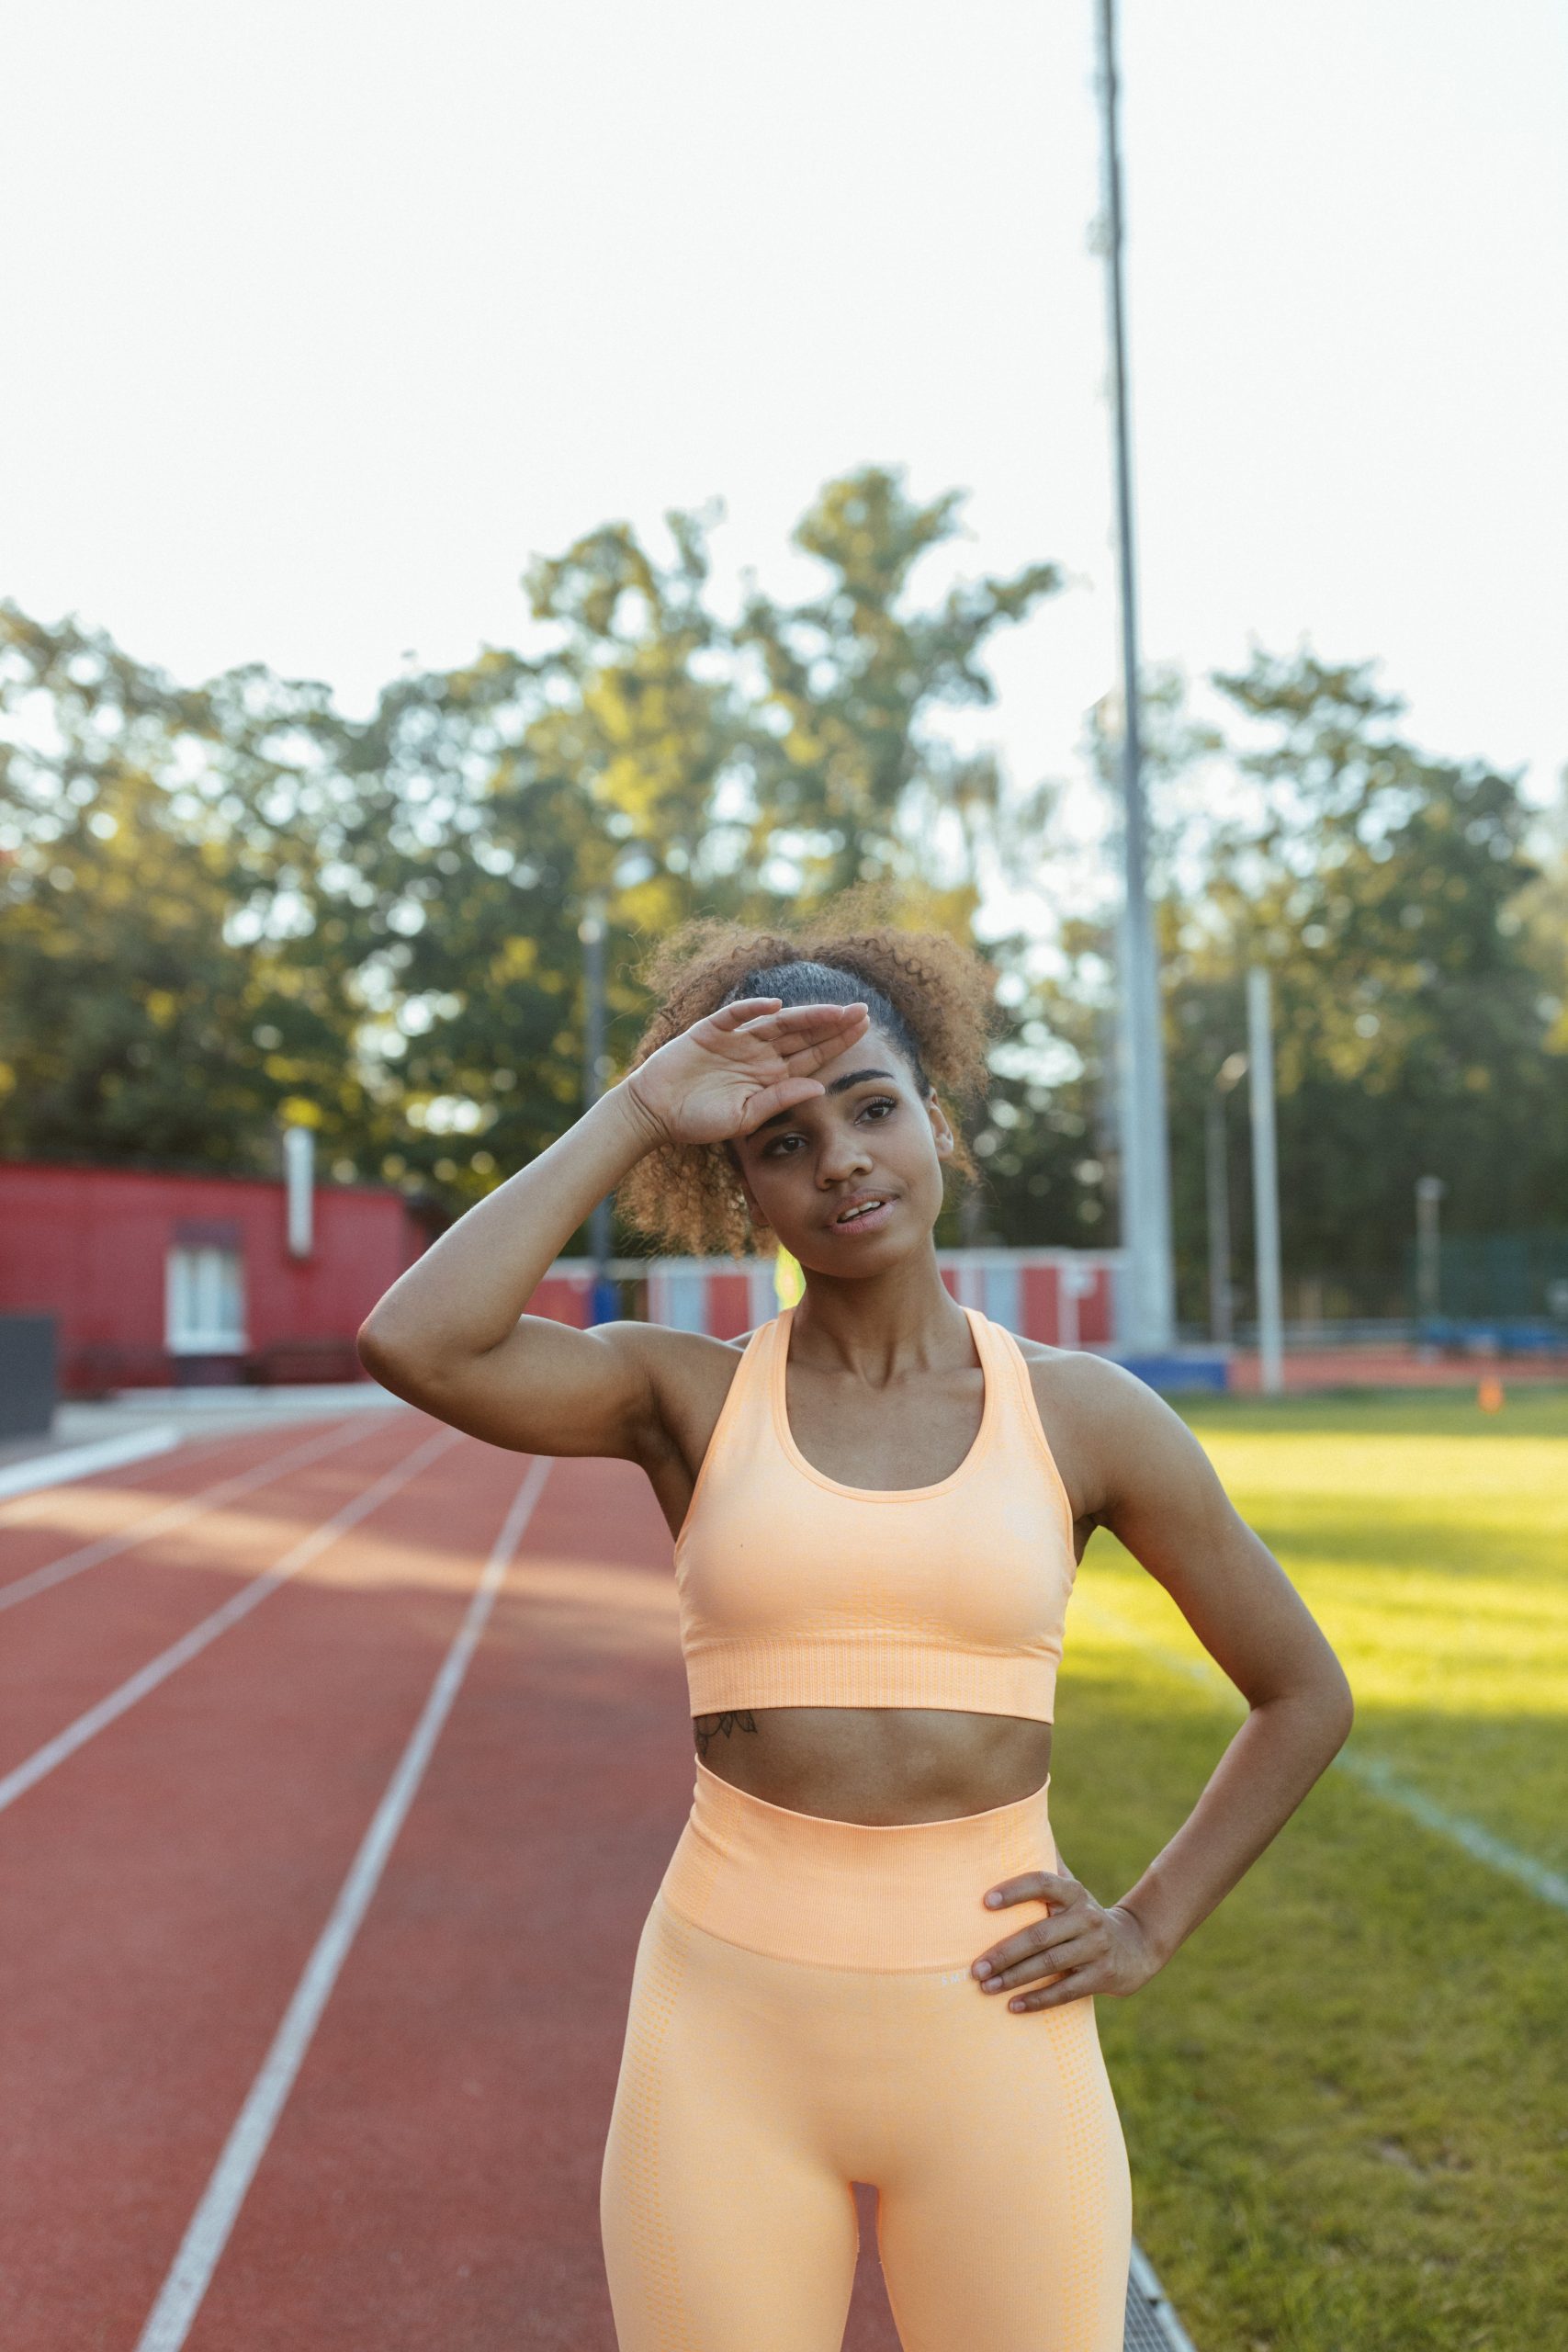 Female athlete wiping sweat from her forehead on a track field.